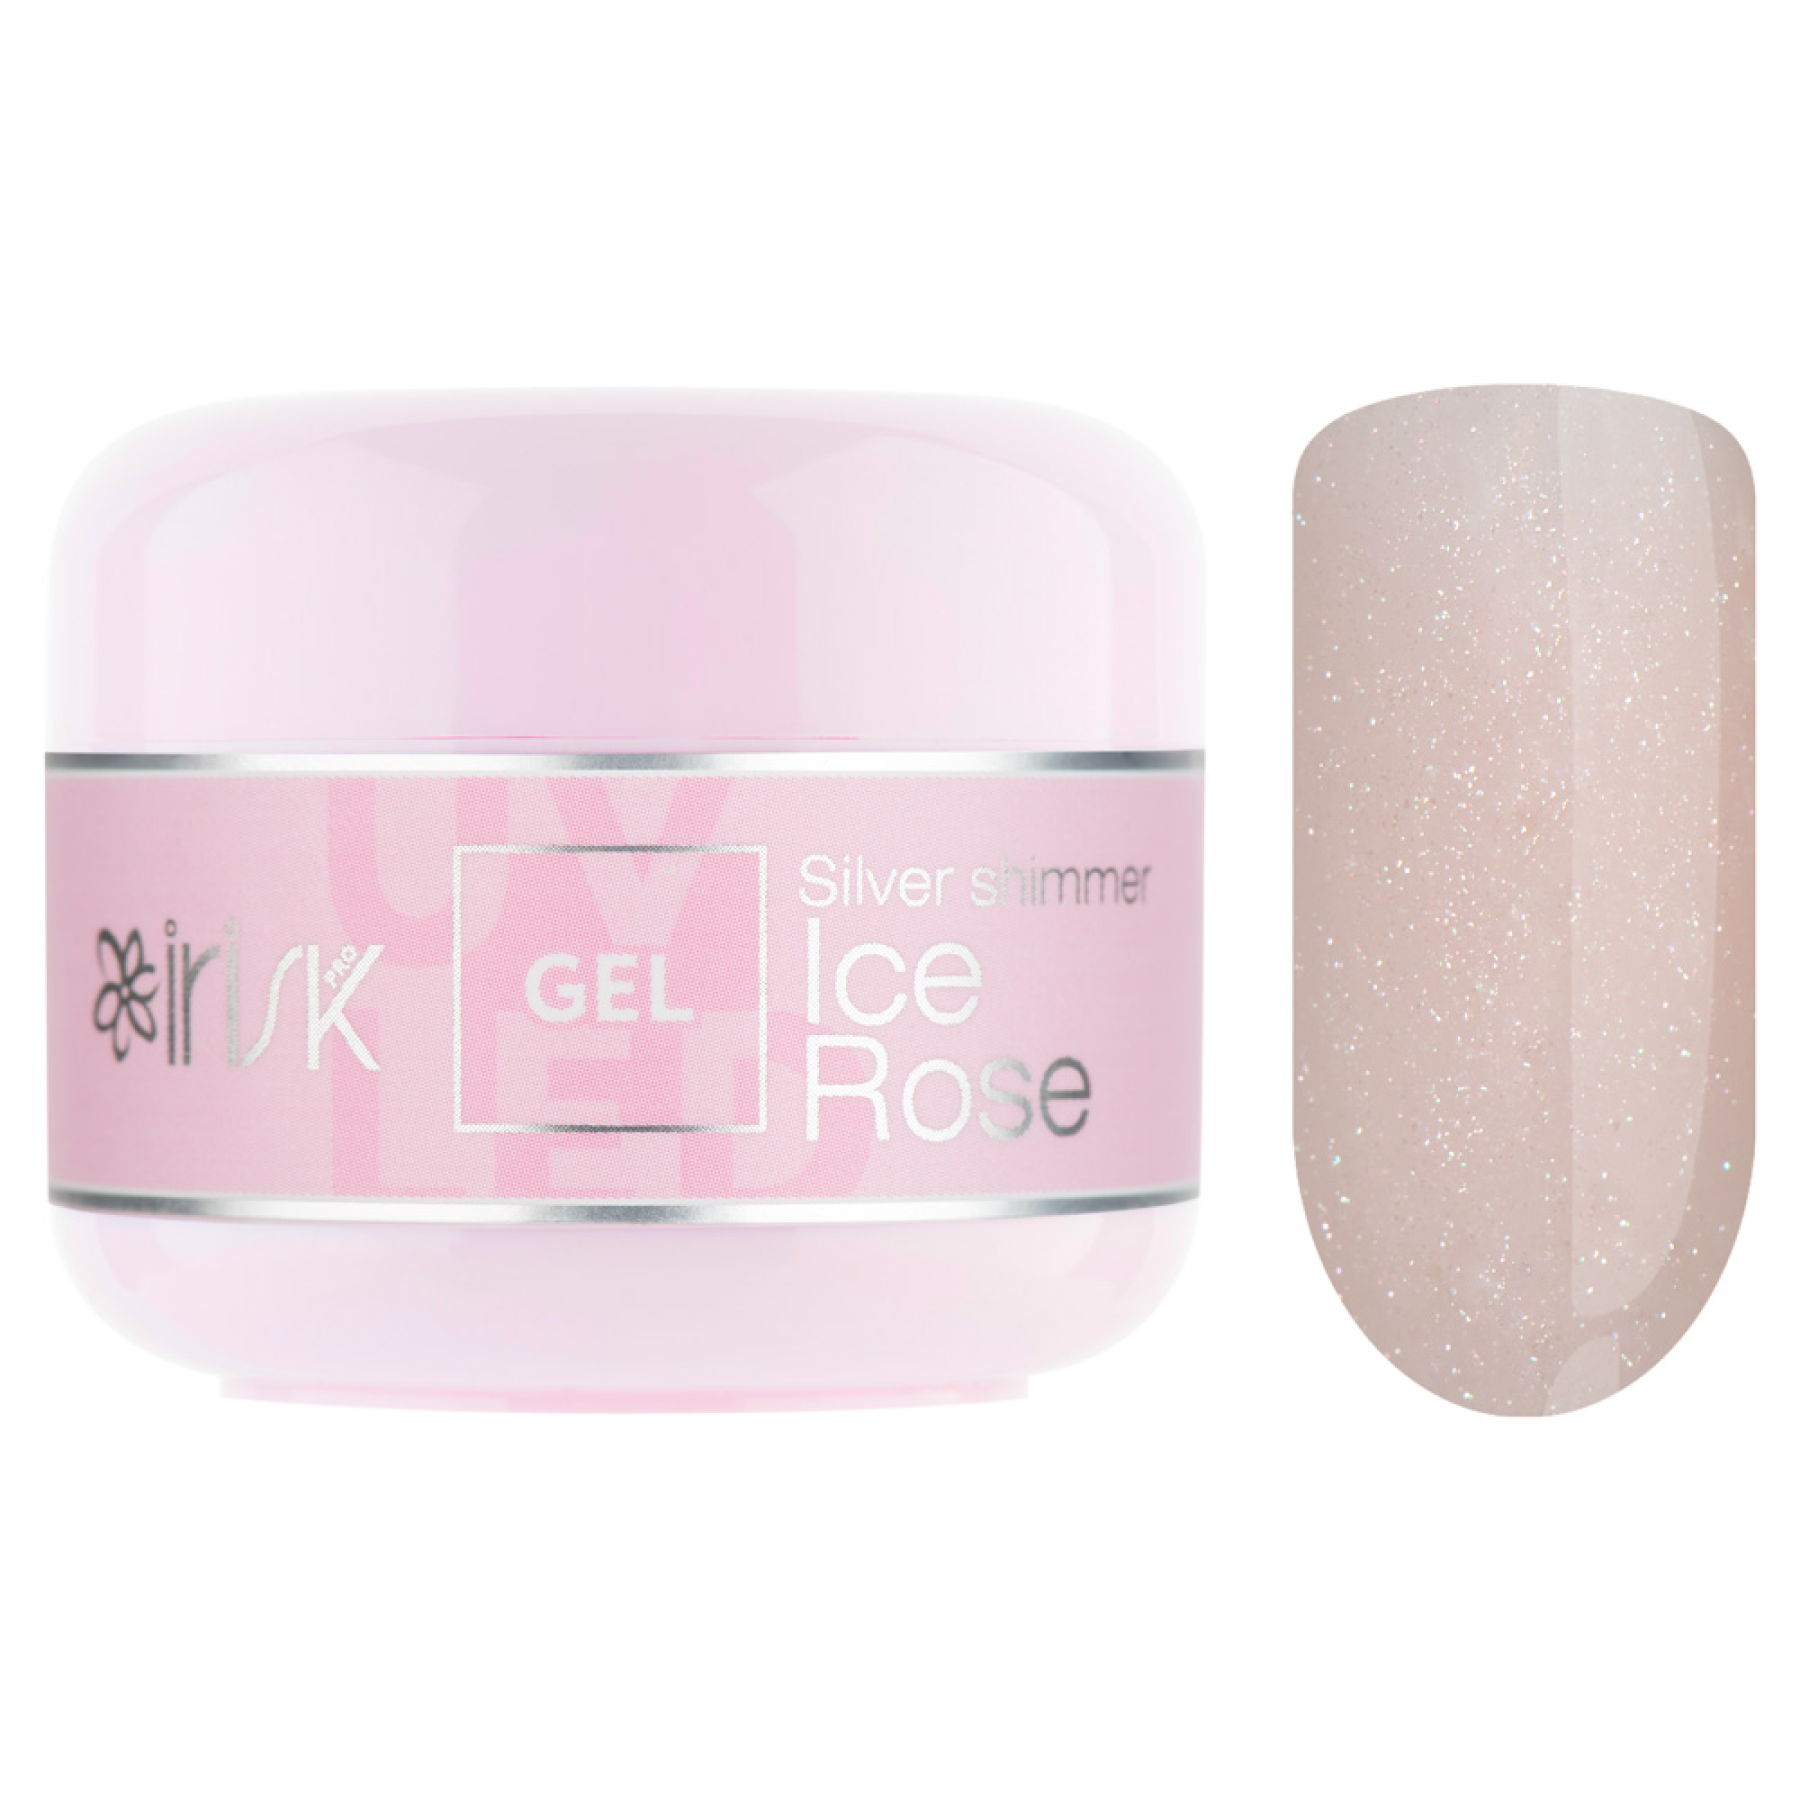 Гель ABC Limited collection 16 Ice Rose Silver shimmer, 15мл созвездие хаоса